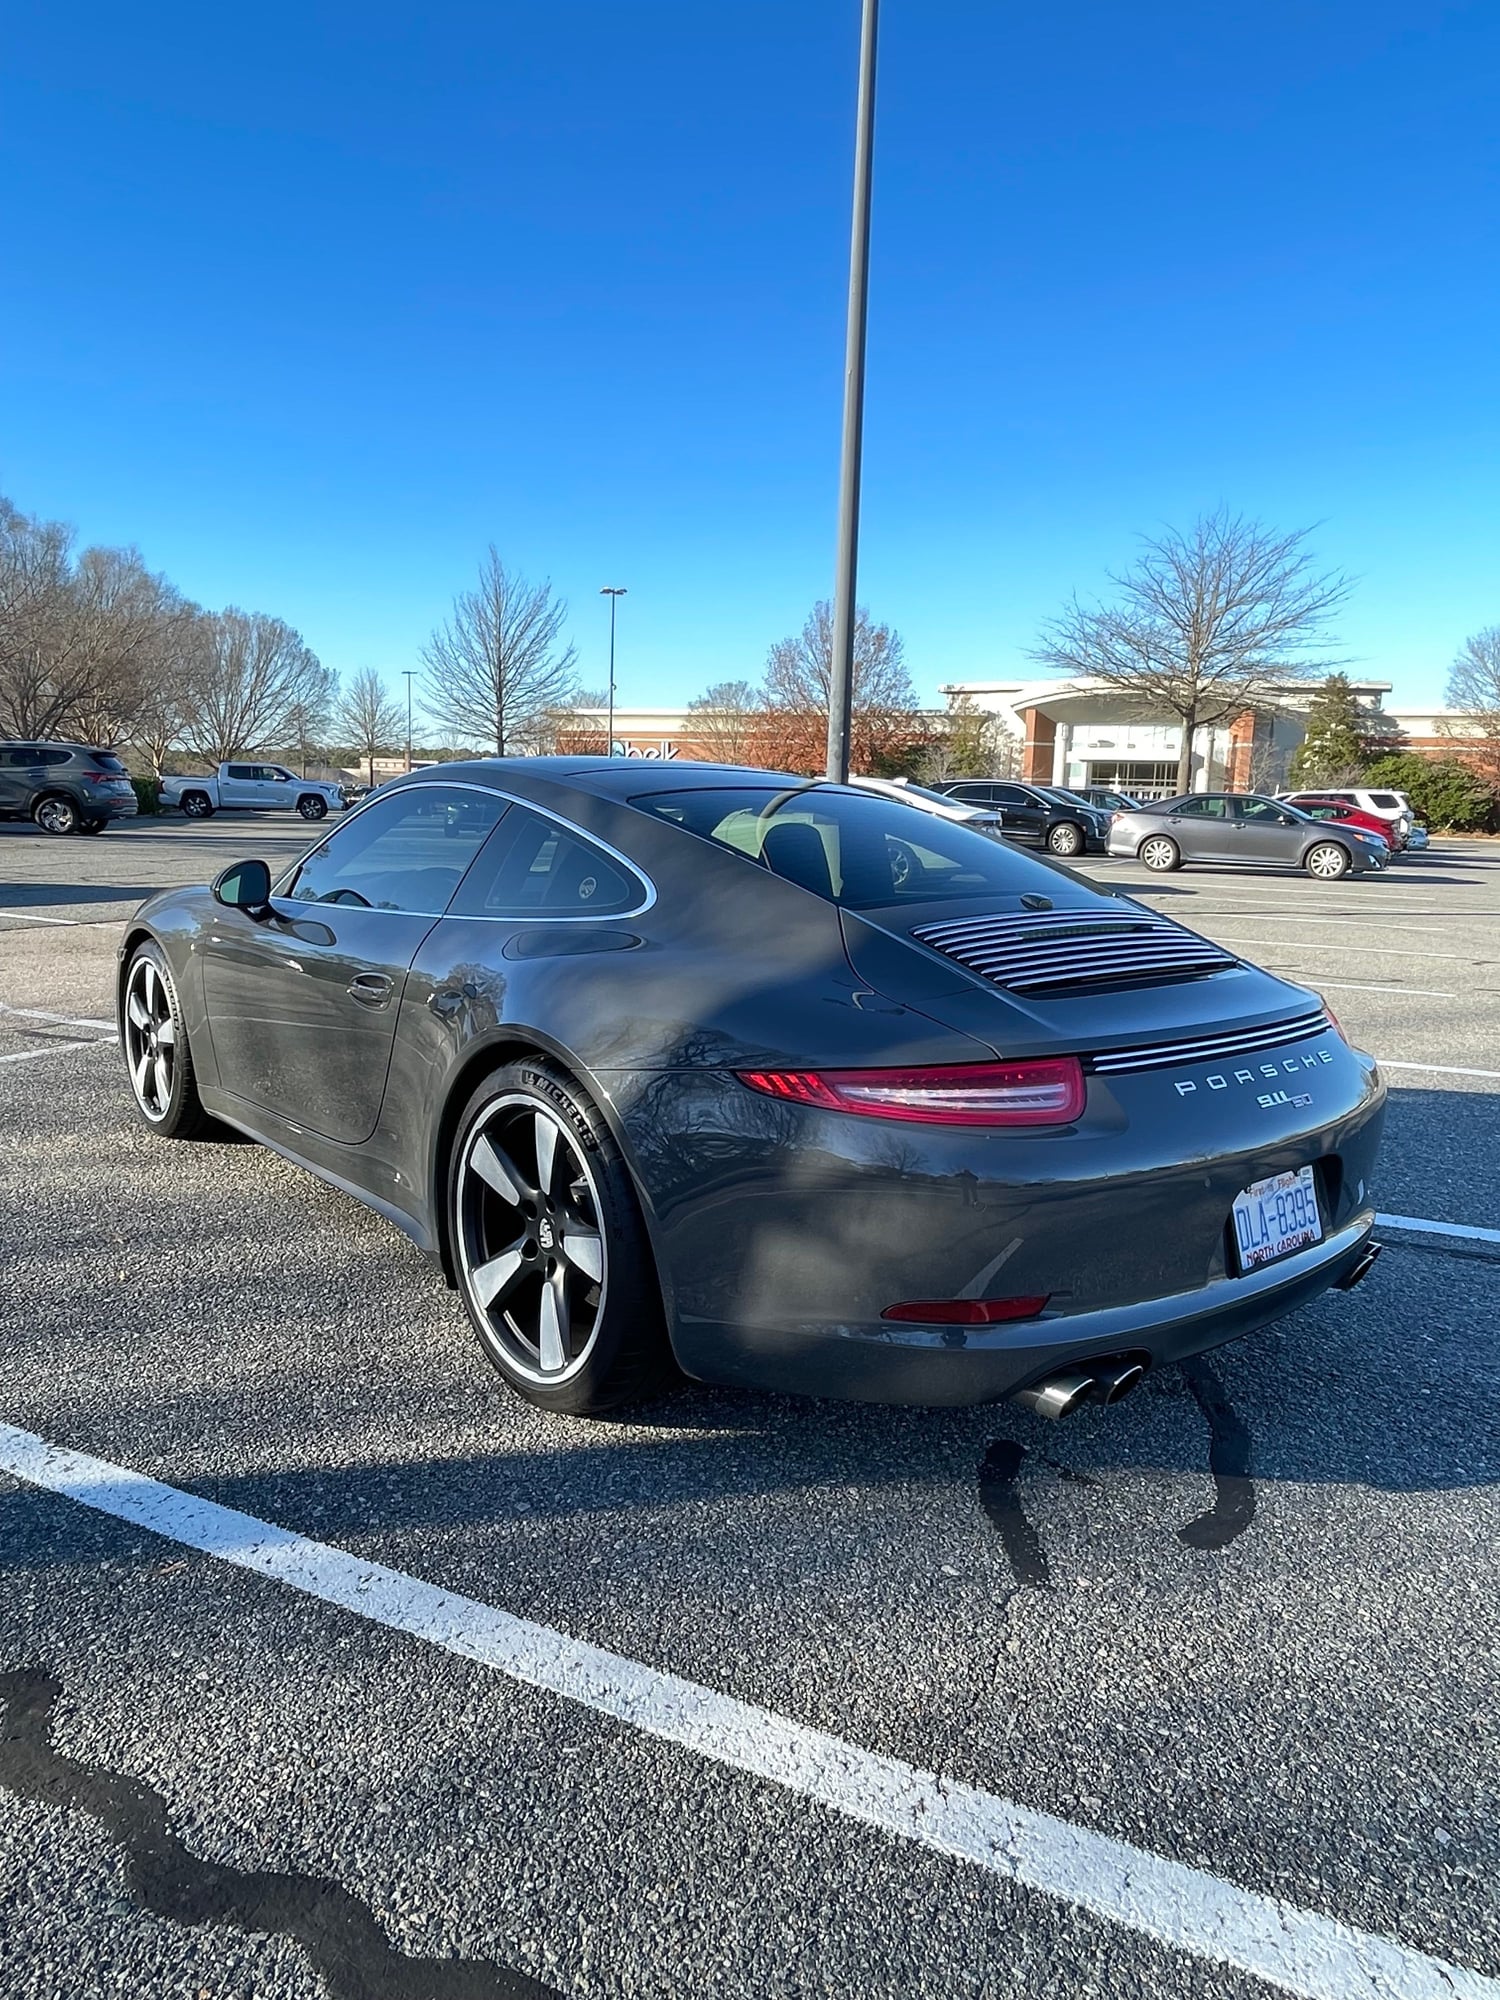 2014 Porsche 911 - My beautiful 911 50th Anniversary - Used - VIN WP0AB2A9XES121346 - 6 cyl - 2WD - Automatic - Coupe - Gray - New Hill, NC 27562, United States